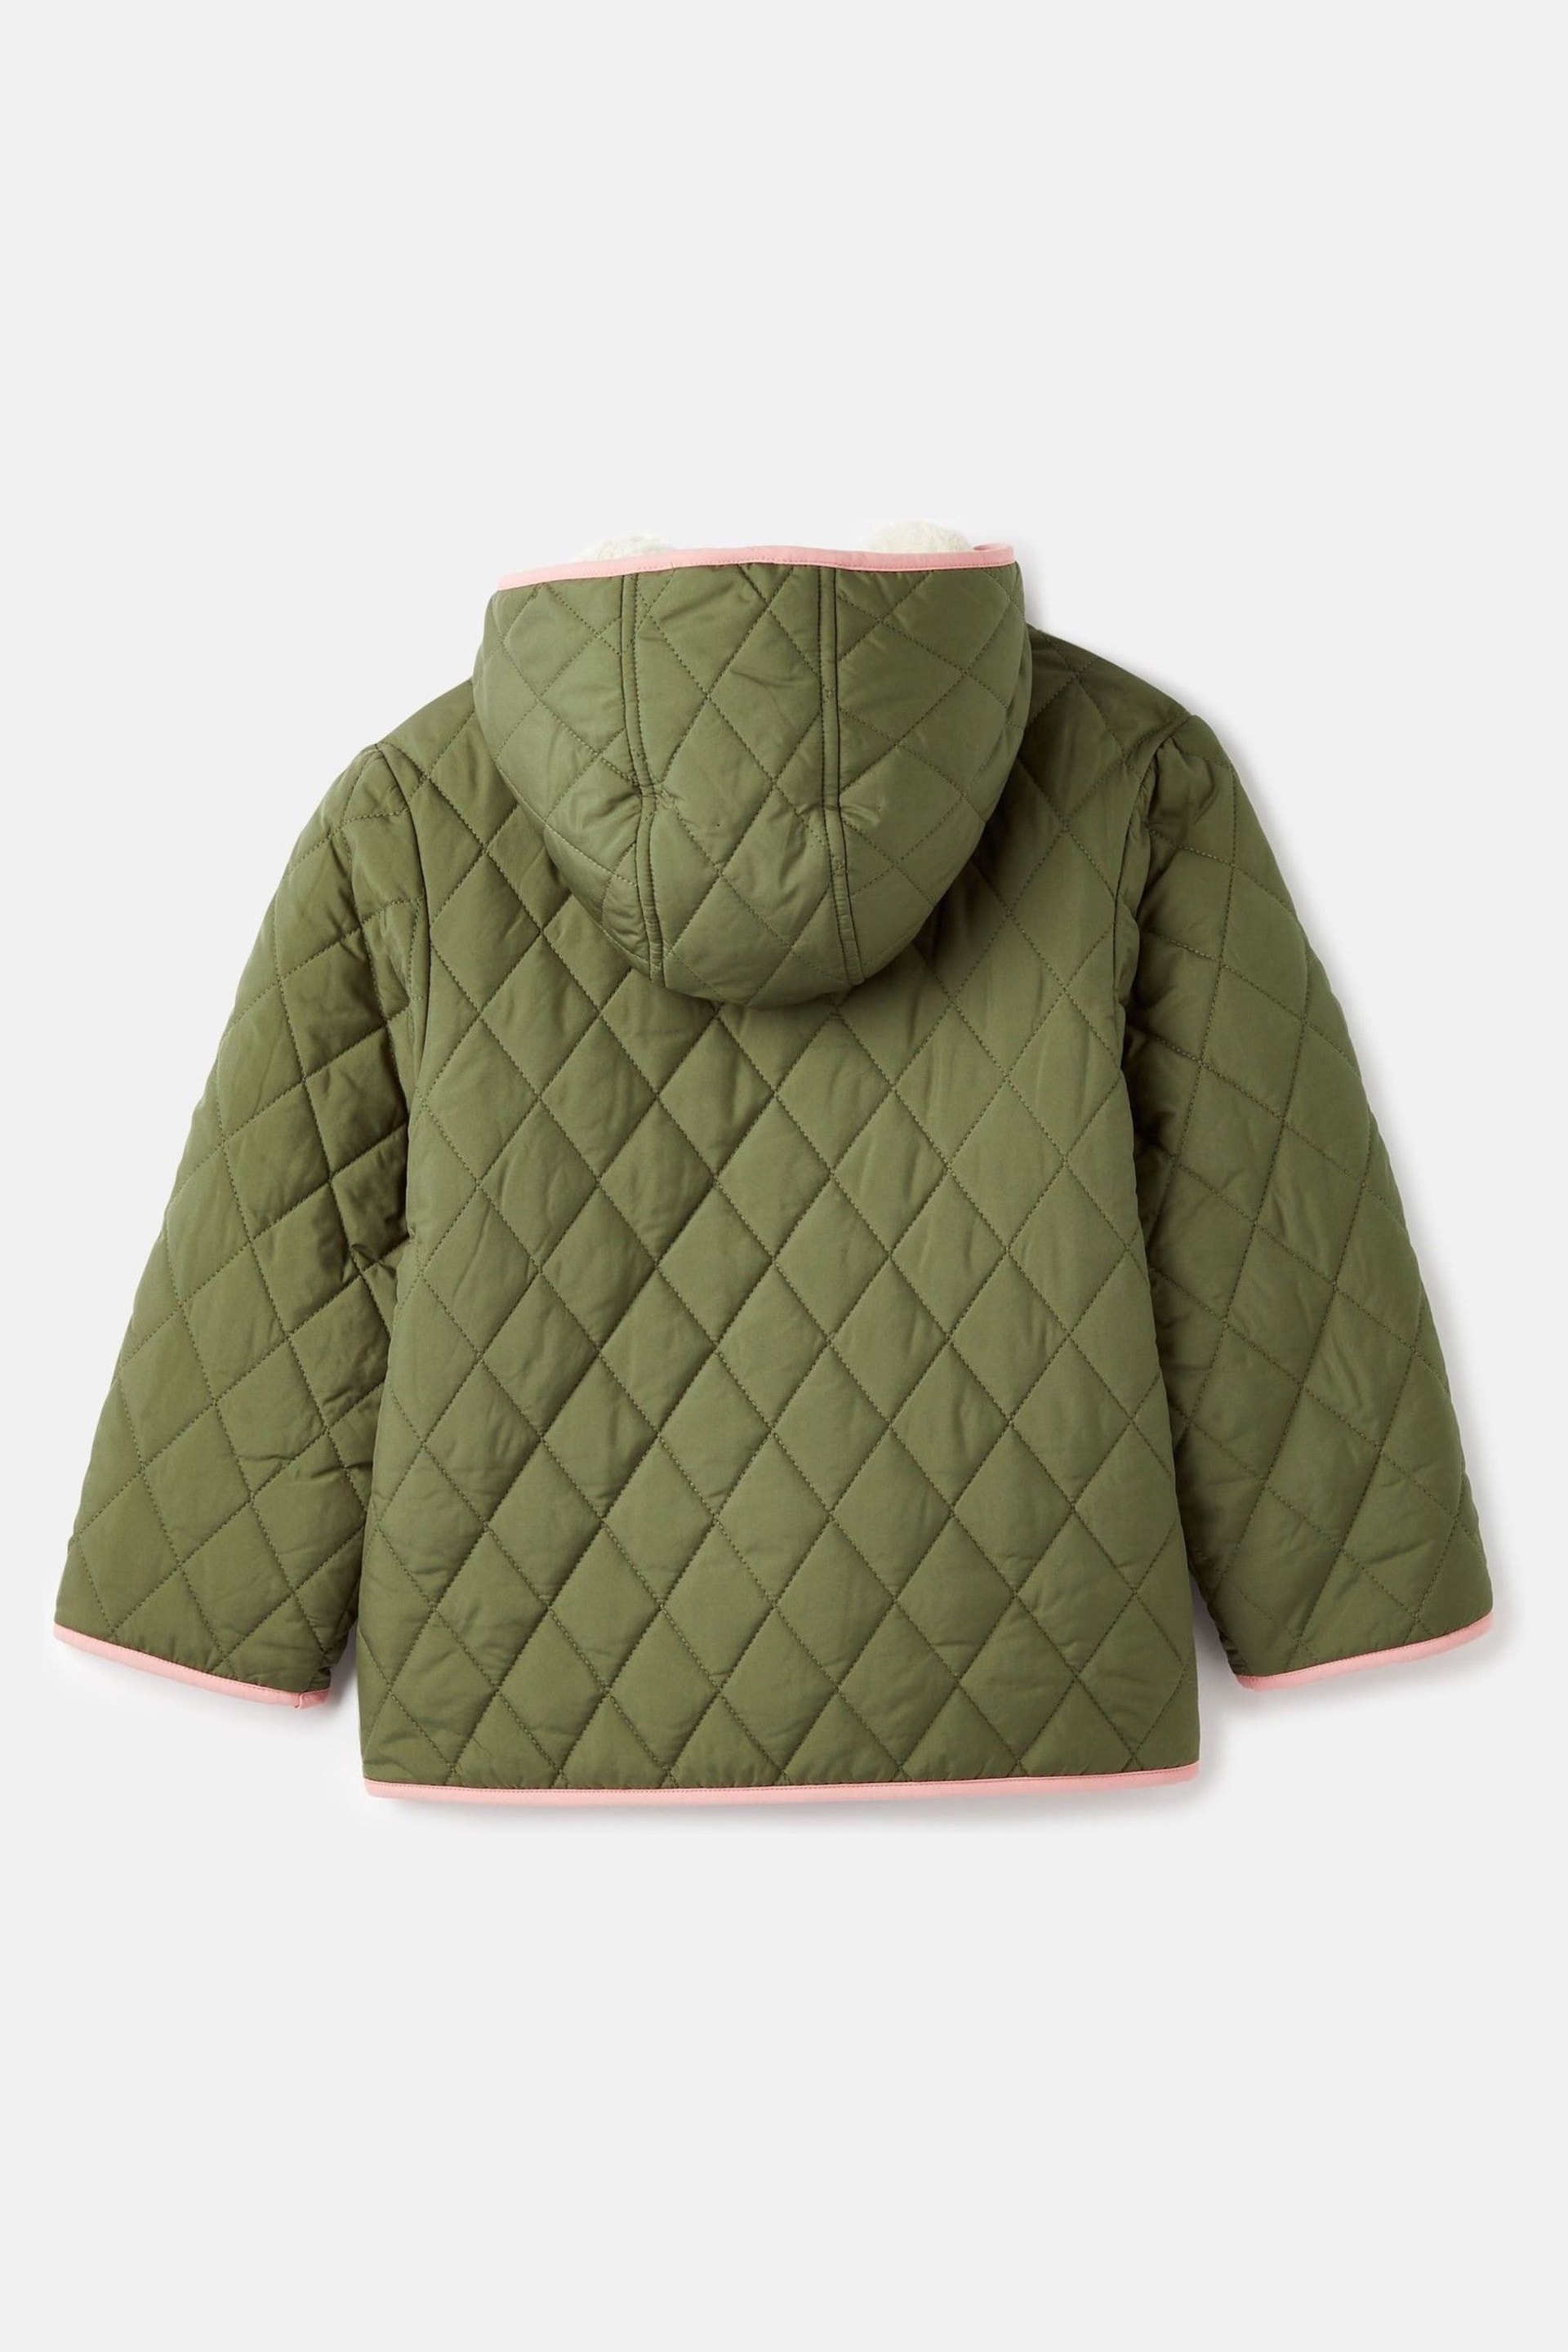 Joules Kali Cream Fleece Lined Reversible Quilted Jacket - Image 3 of 6